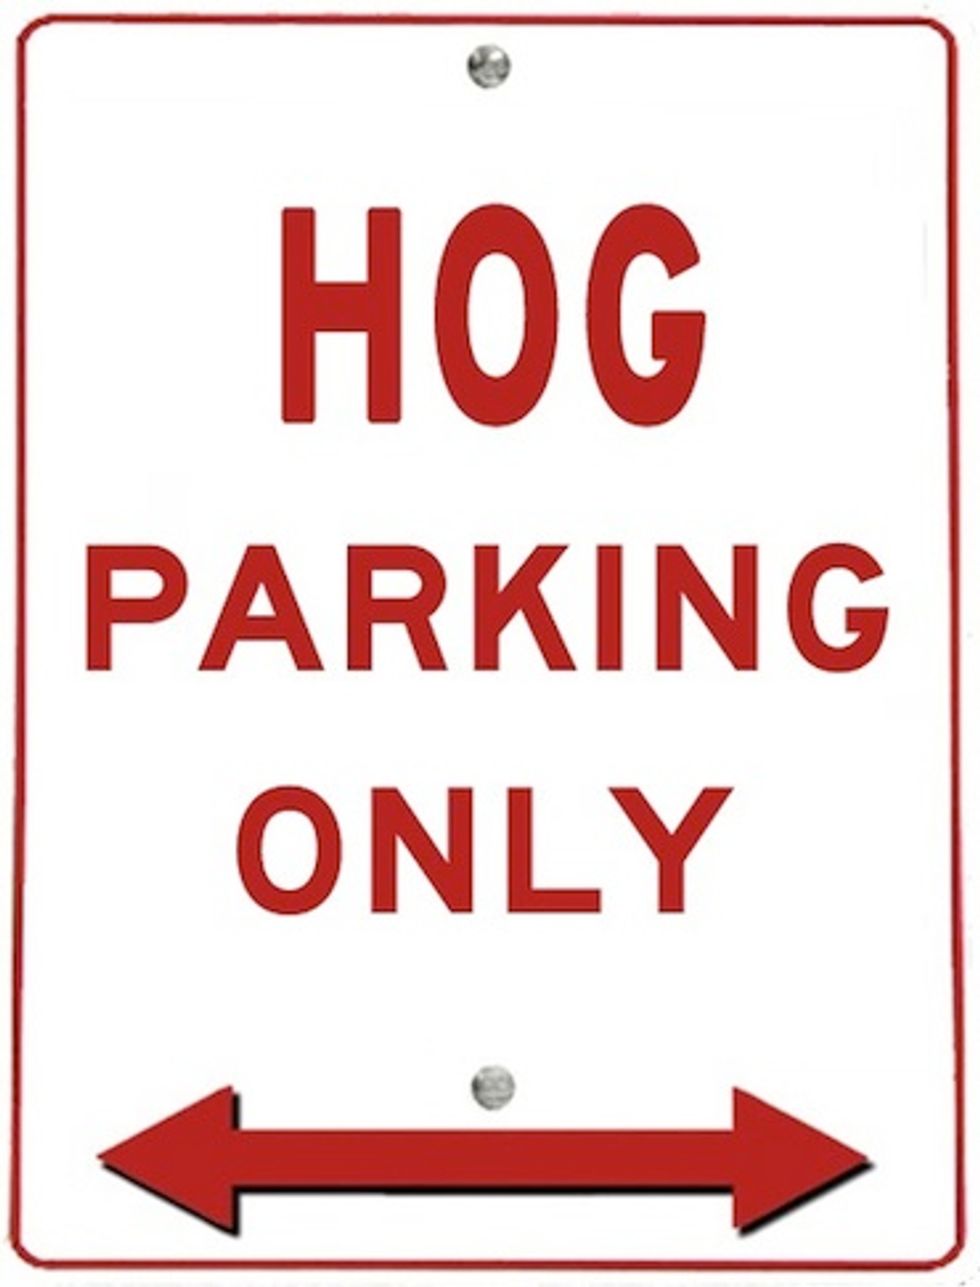 How to Deal with Parking Hogs